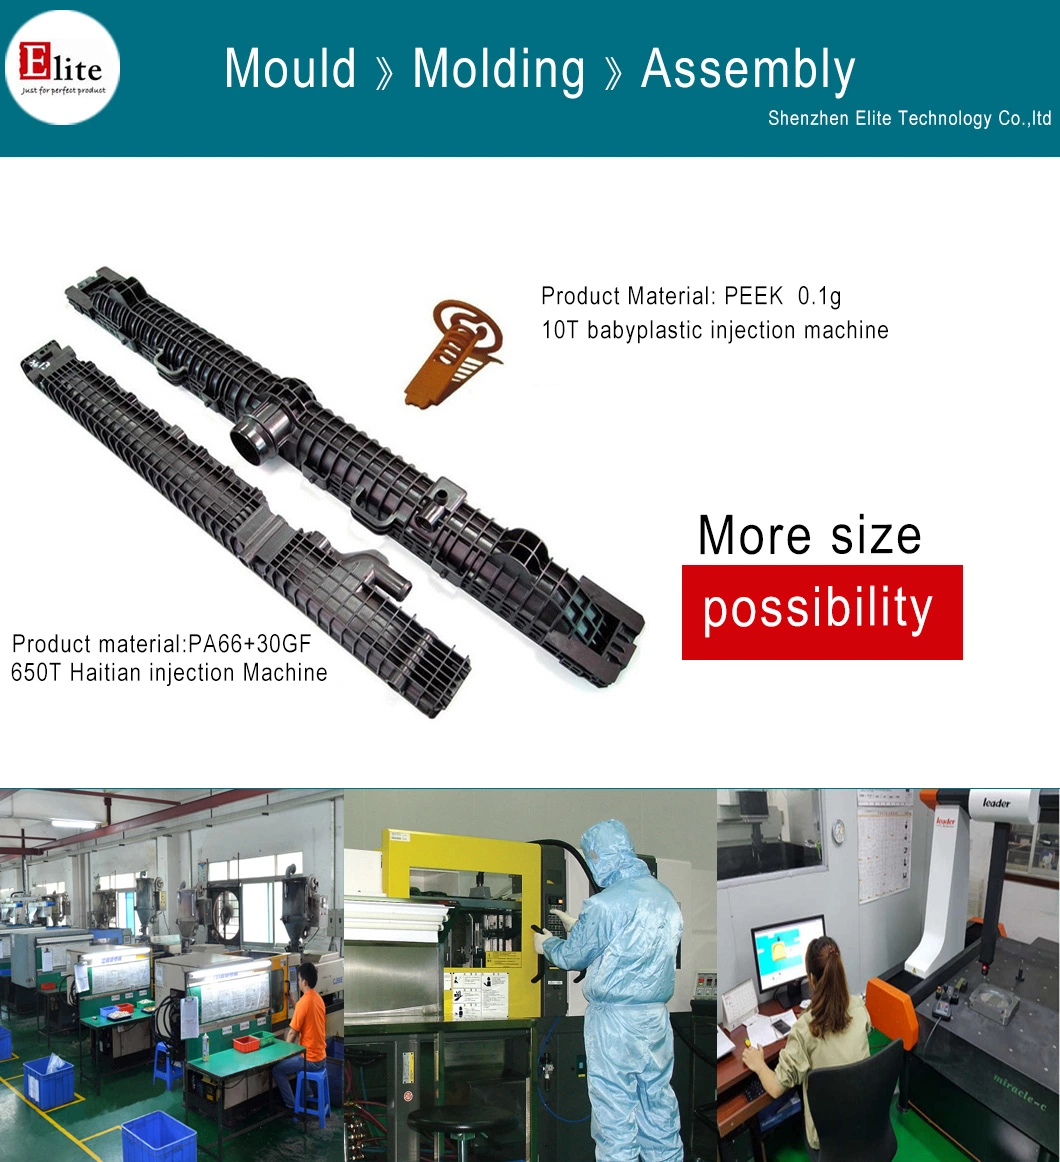 Optical Peek Plastic Molded Product Injection Mould and Molding Service